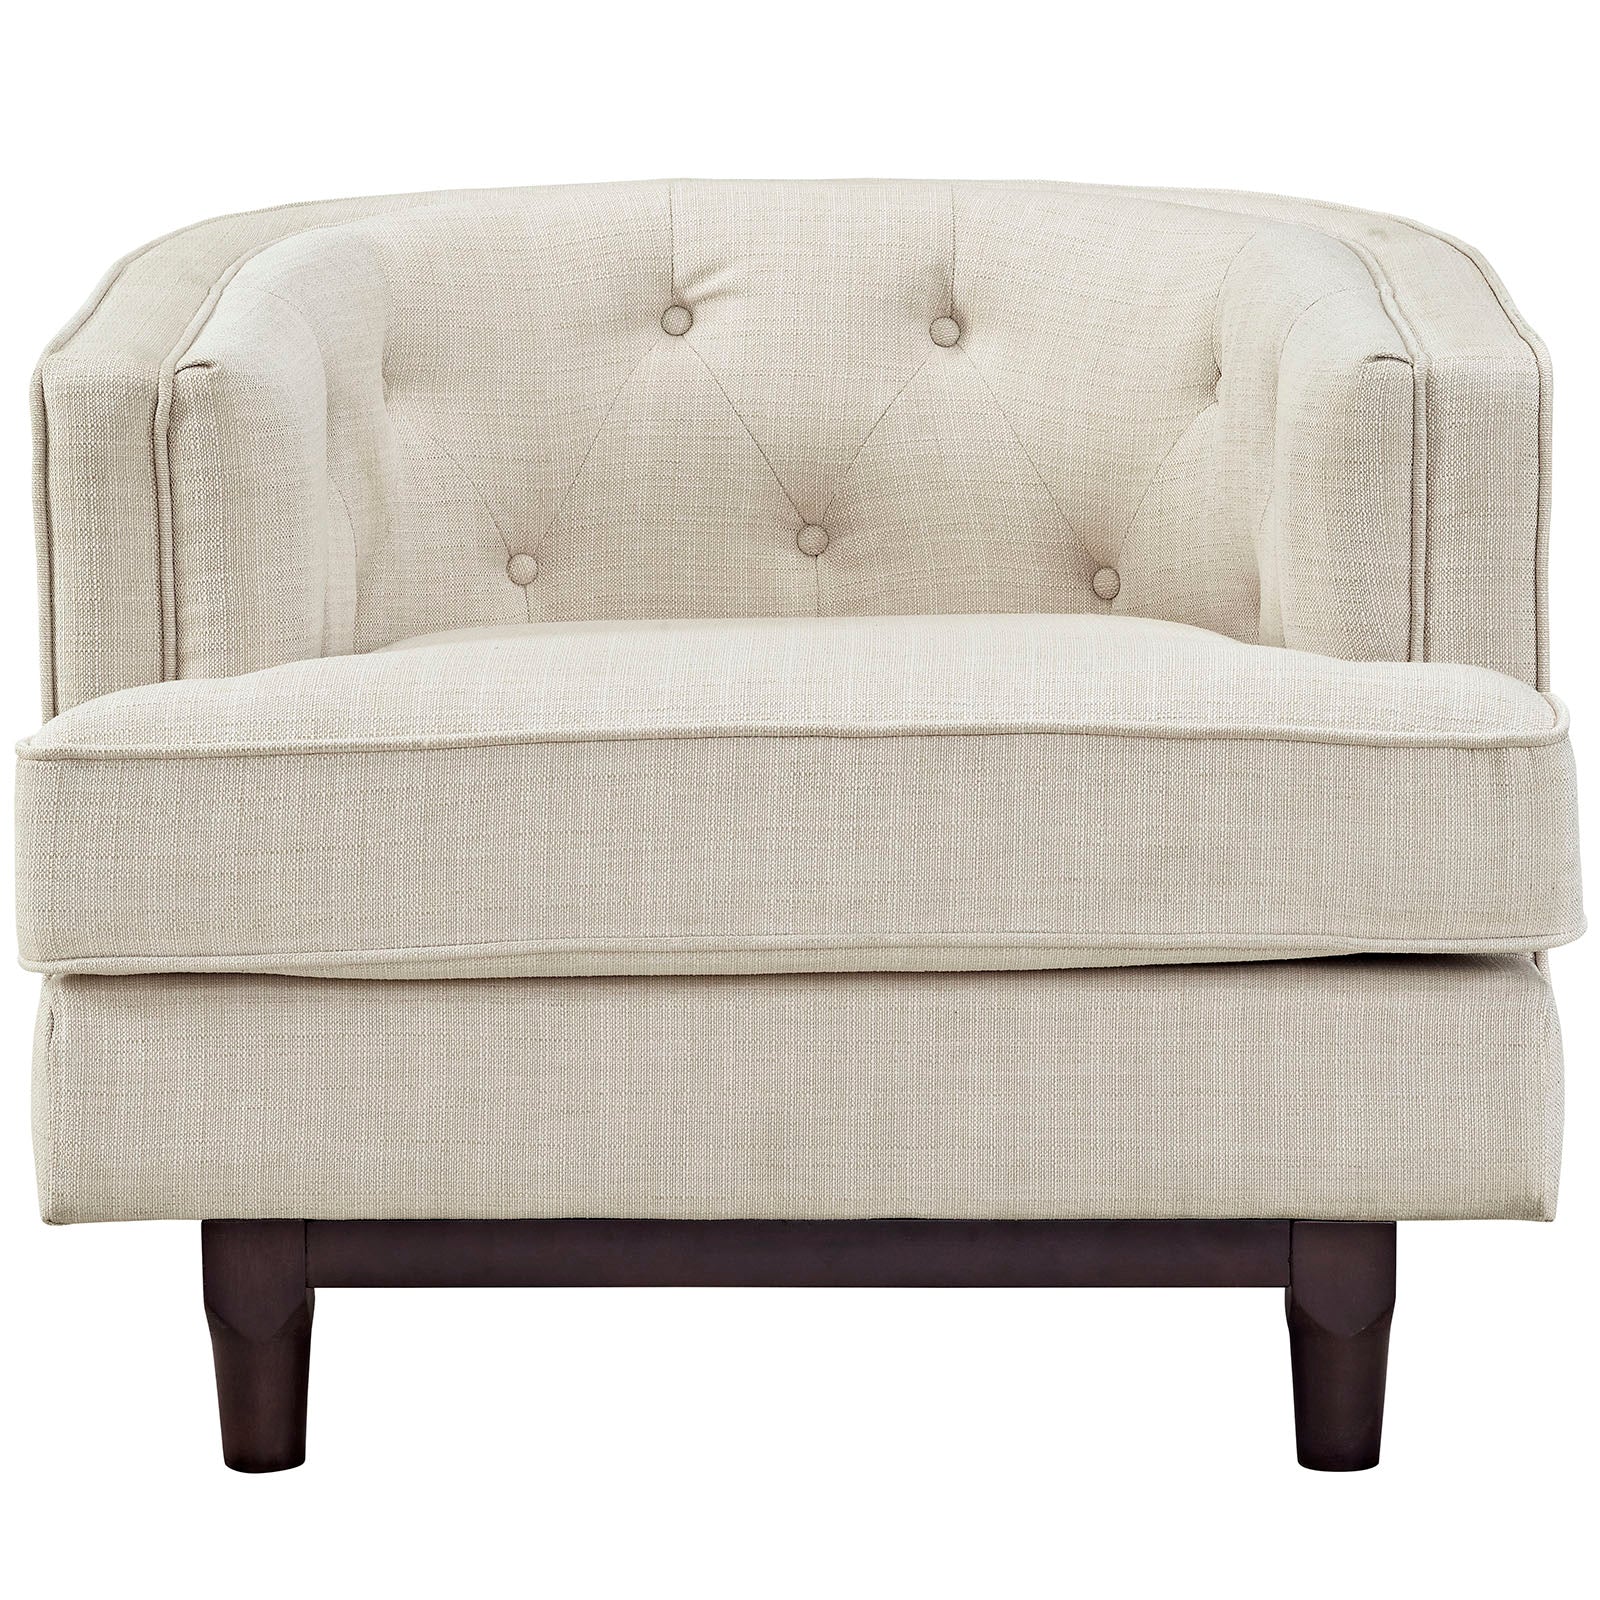 Modway Accent Chairs - Coast Upholstered Fabric Armchair Beige